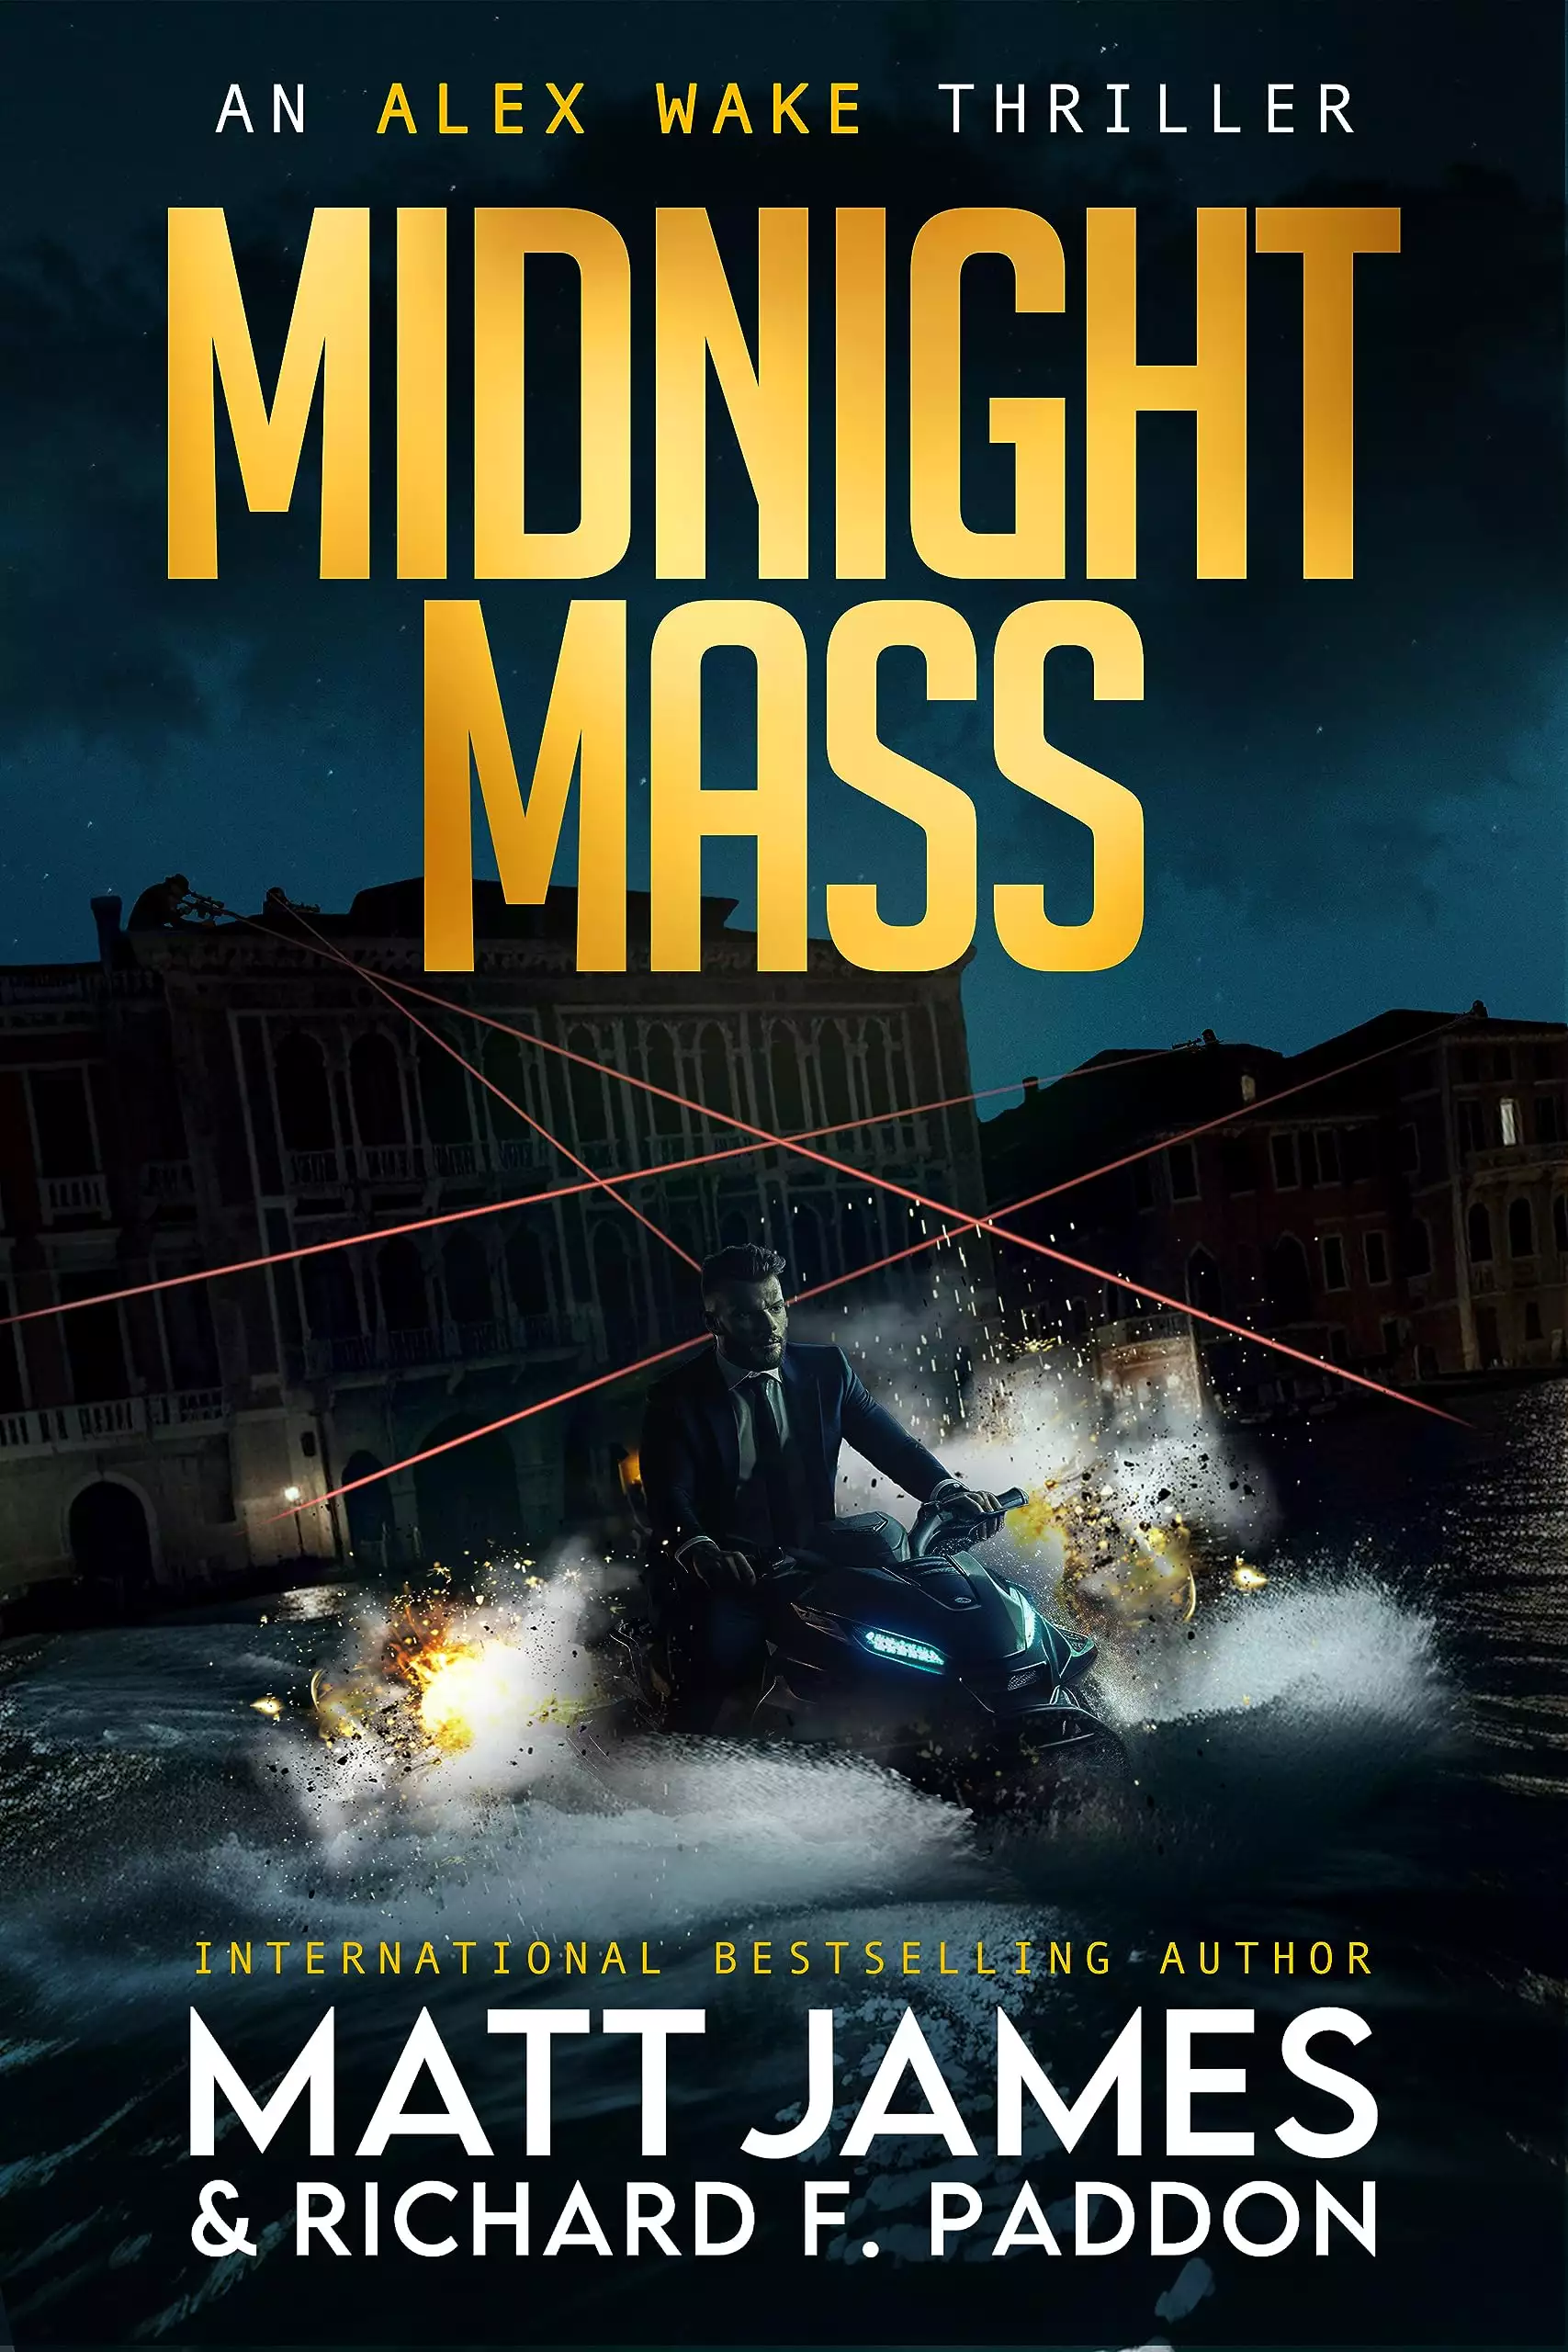 Midnight Mass: A Head-On Collision of Action and Suspense